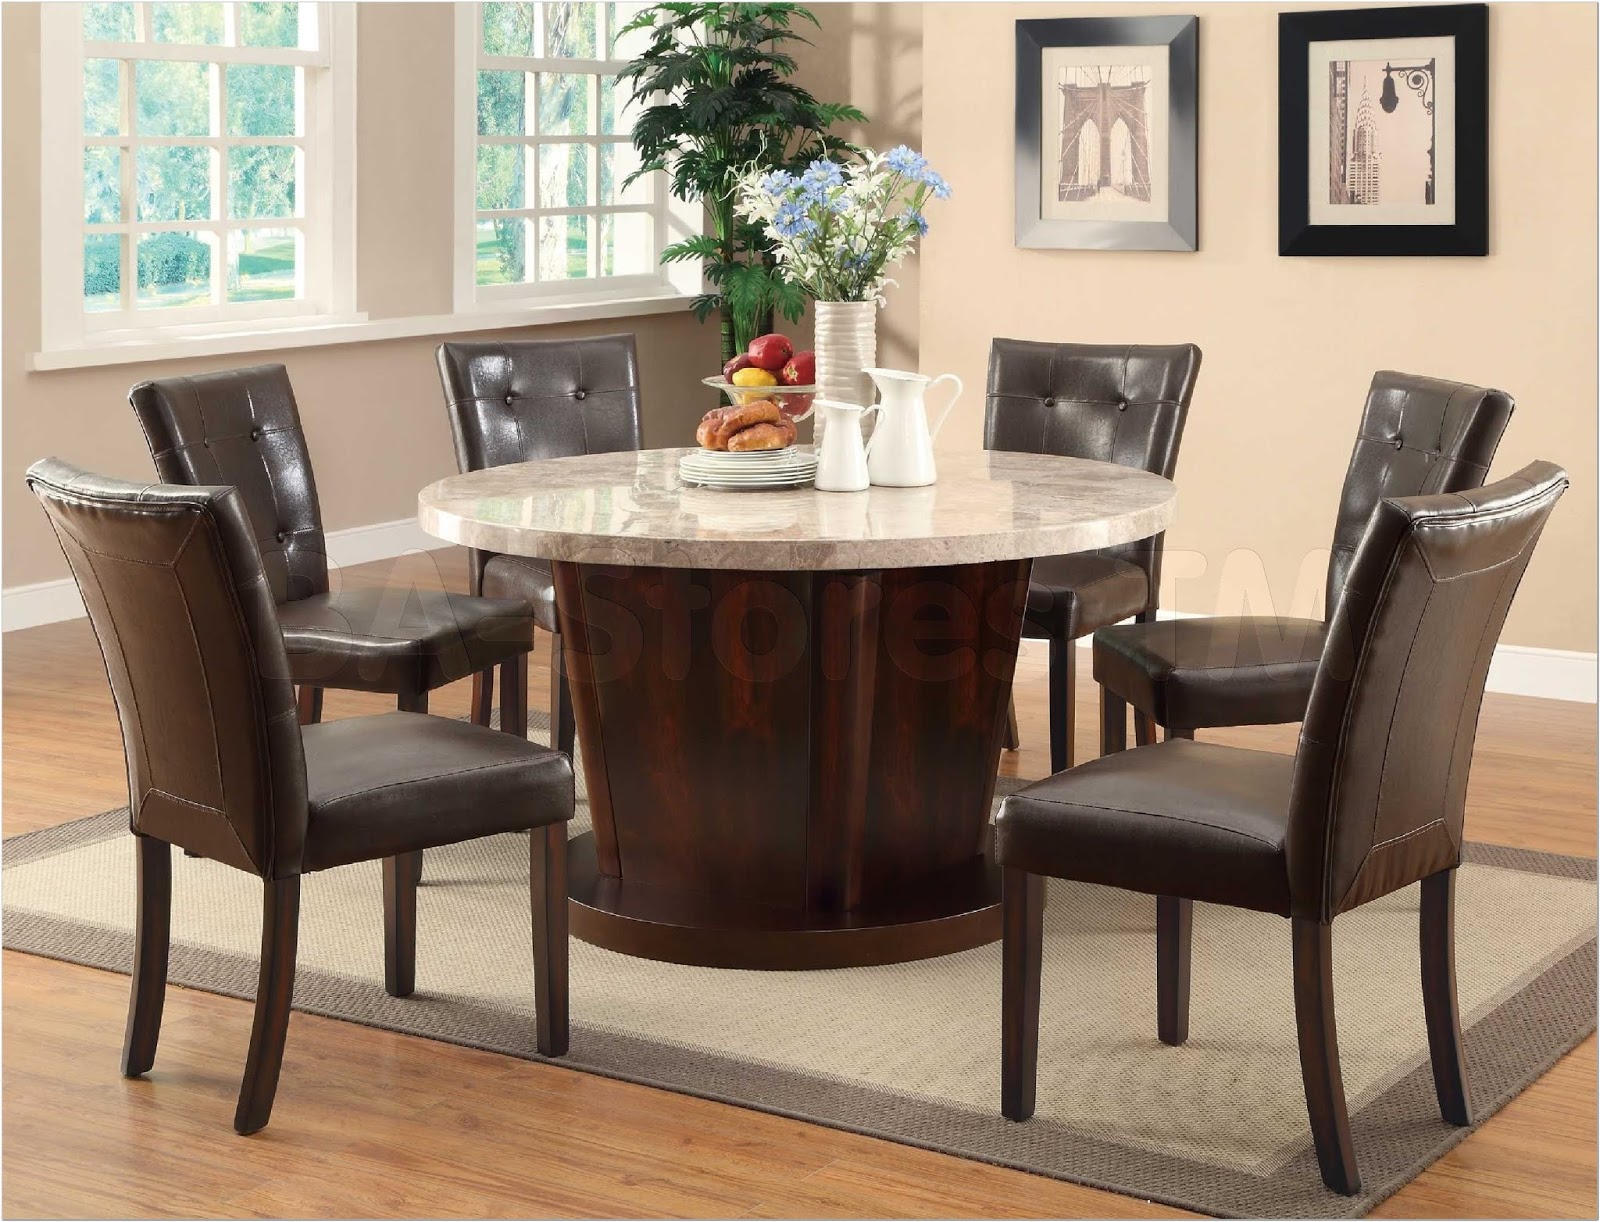 6 Person Circle Dining Table